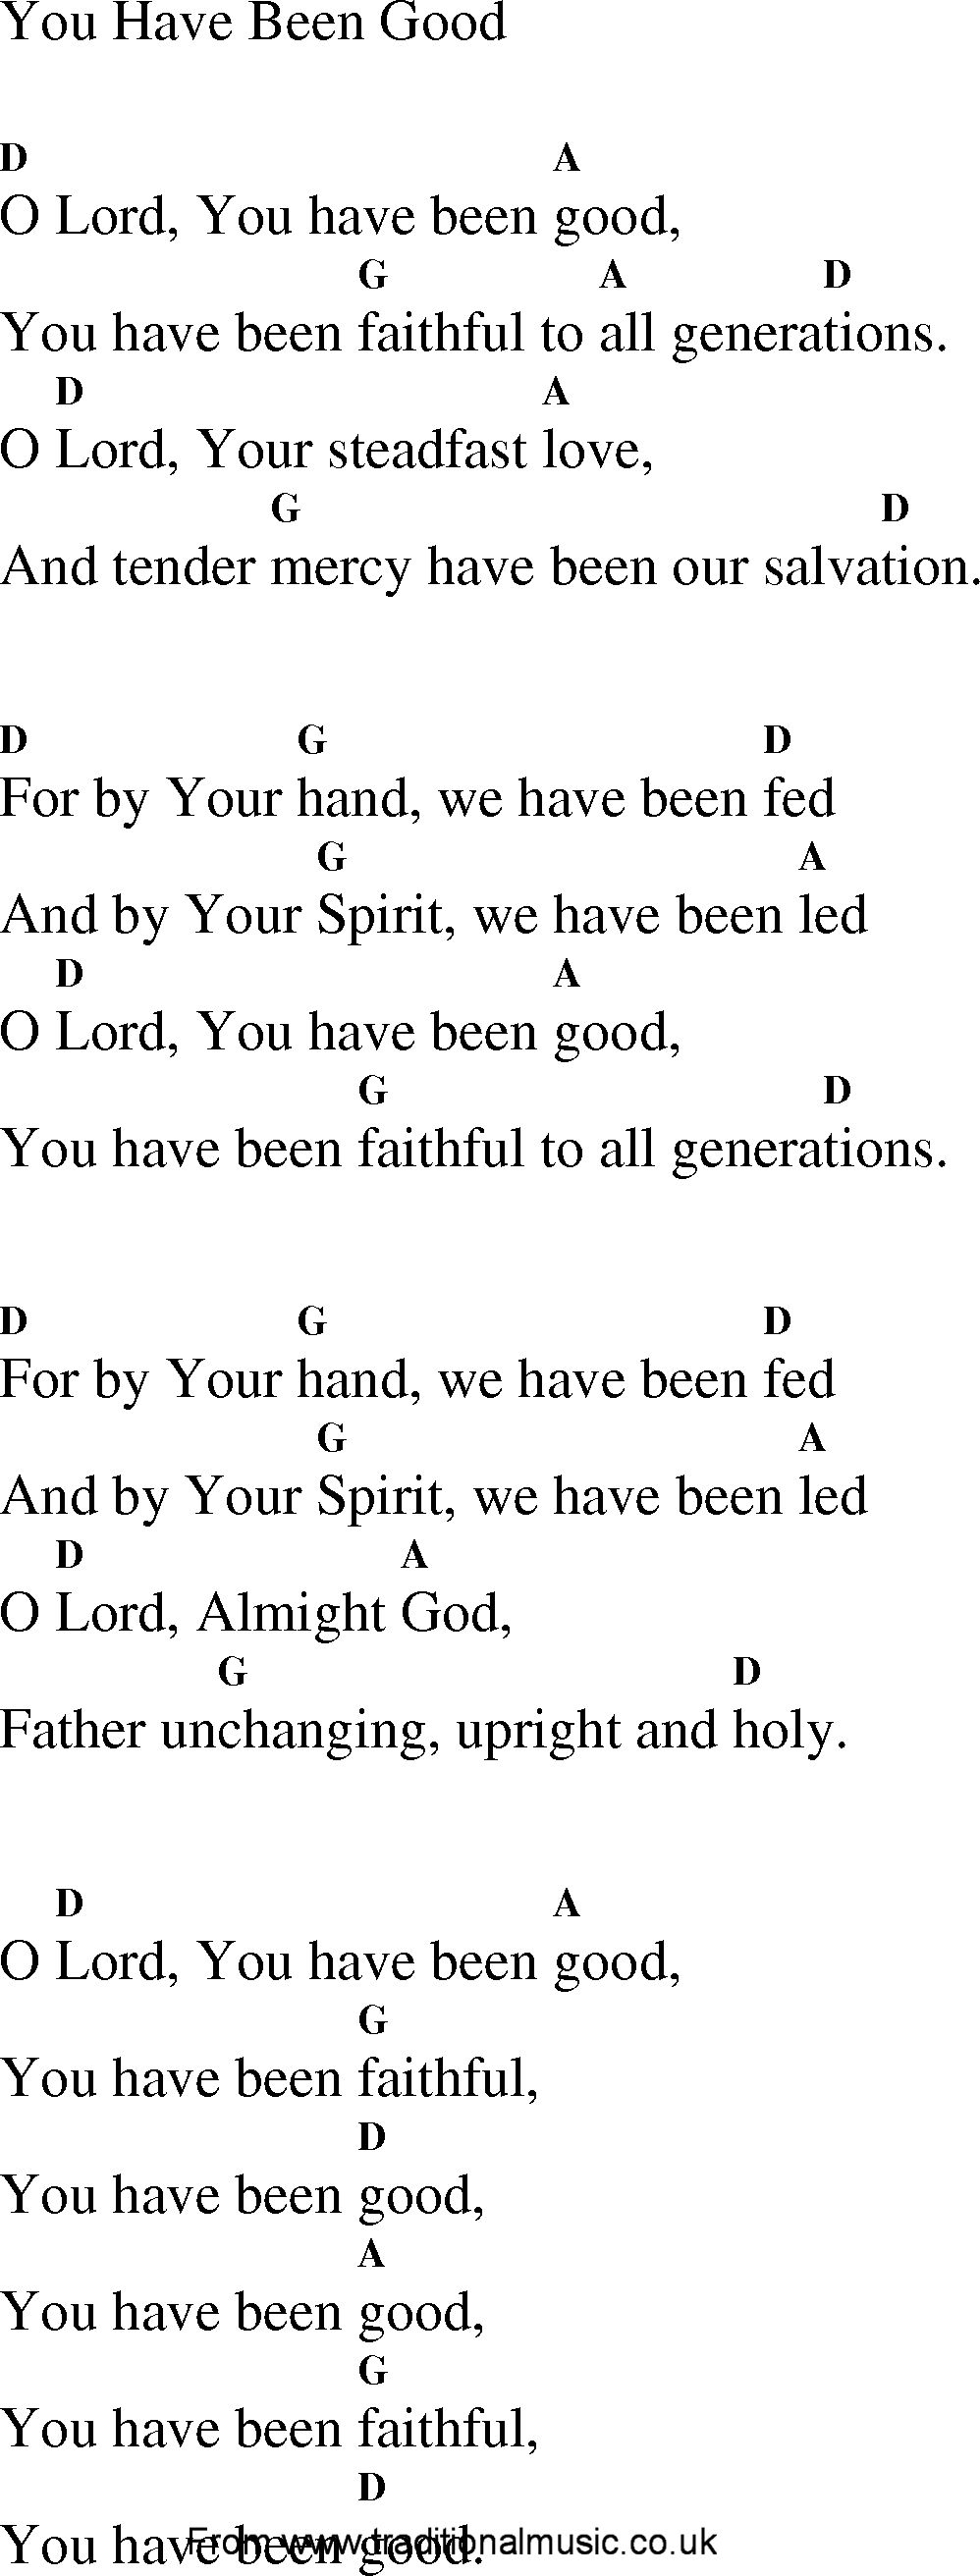 Gospel Song: you_have_been_good, lyrics and chords.